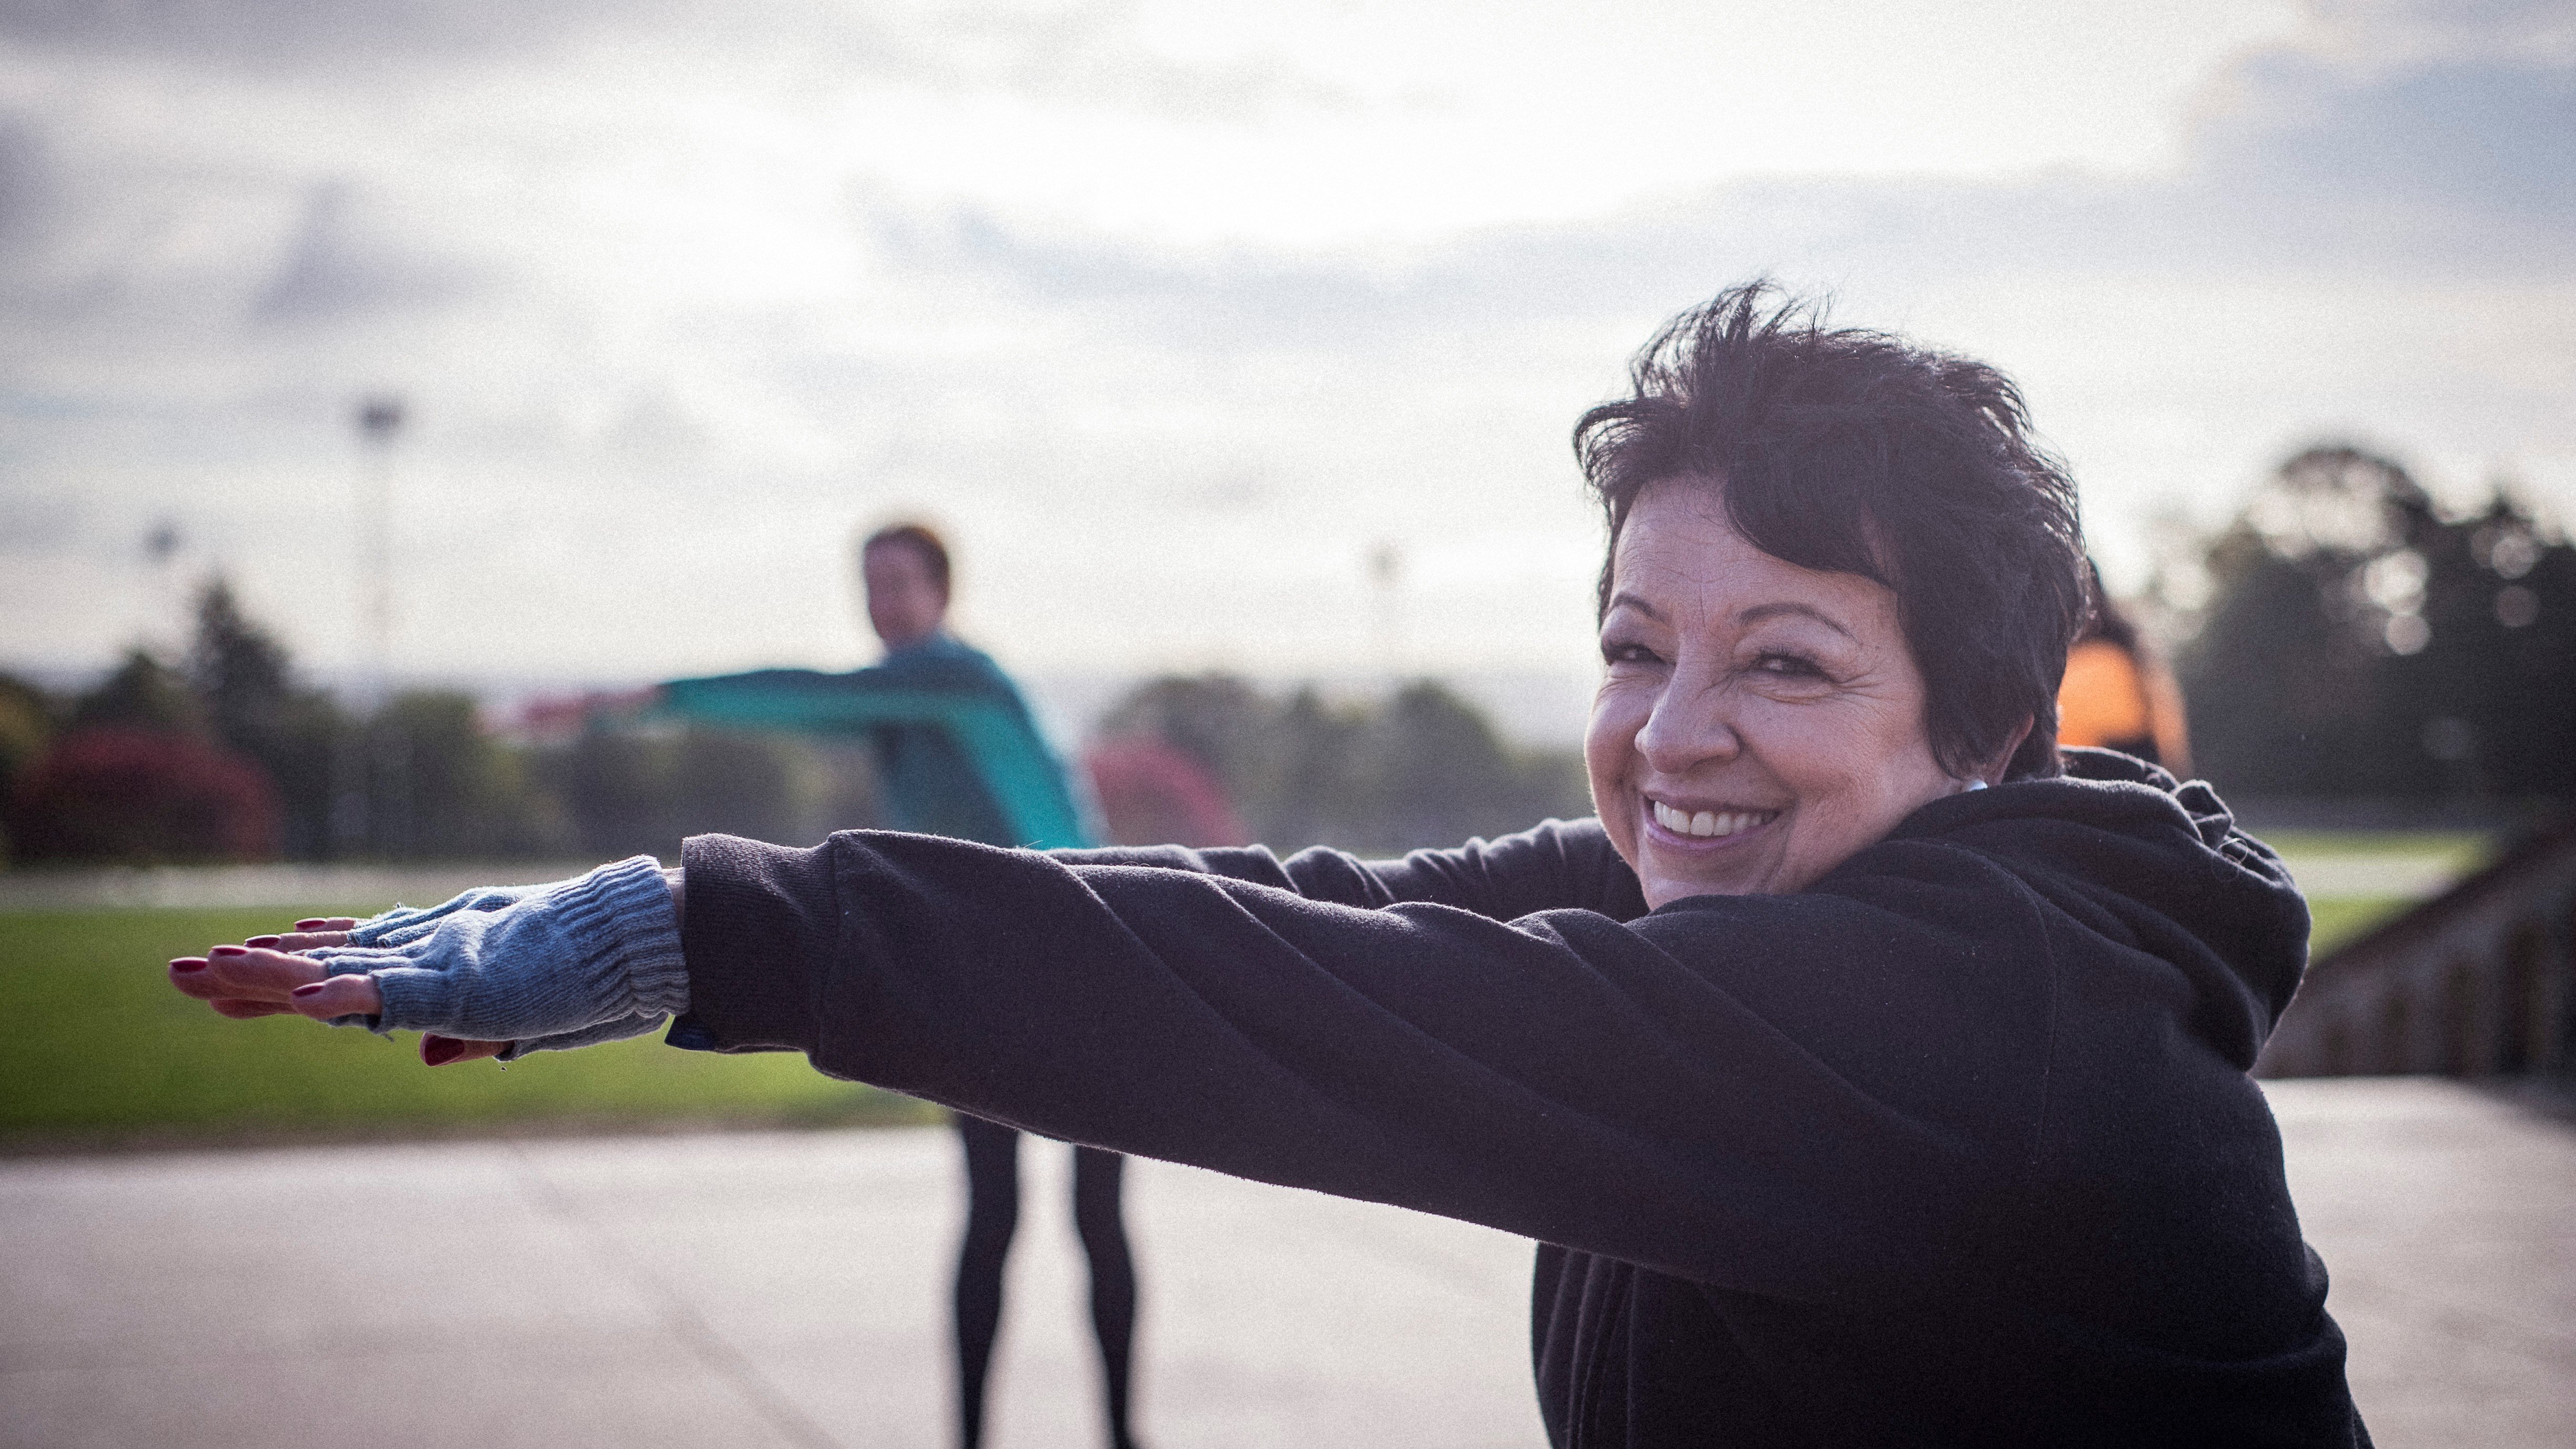 A women over sixty stretching outside, smiling